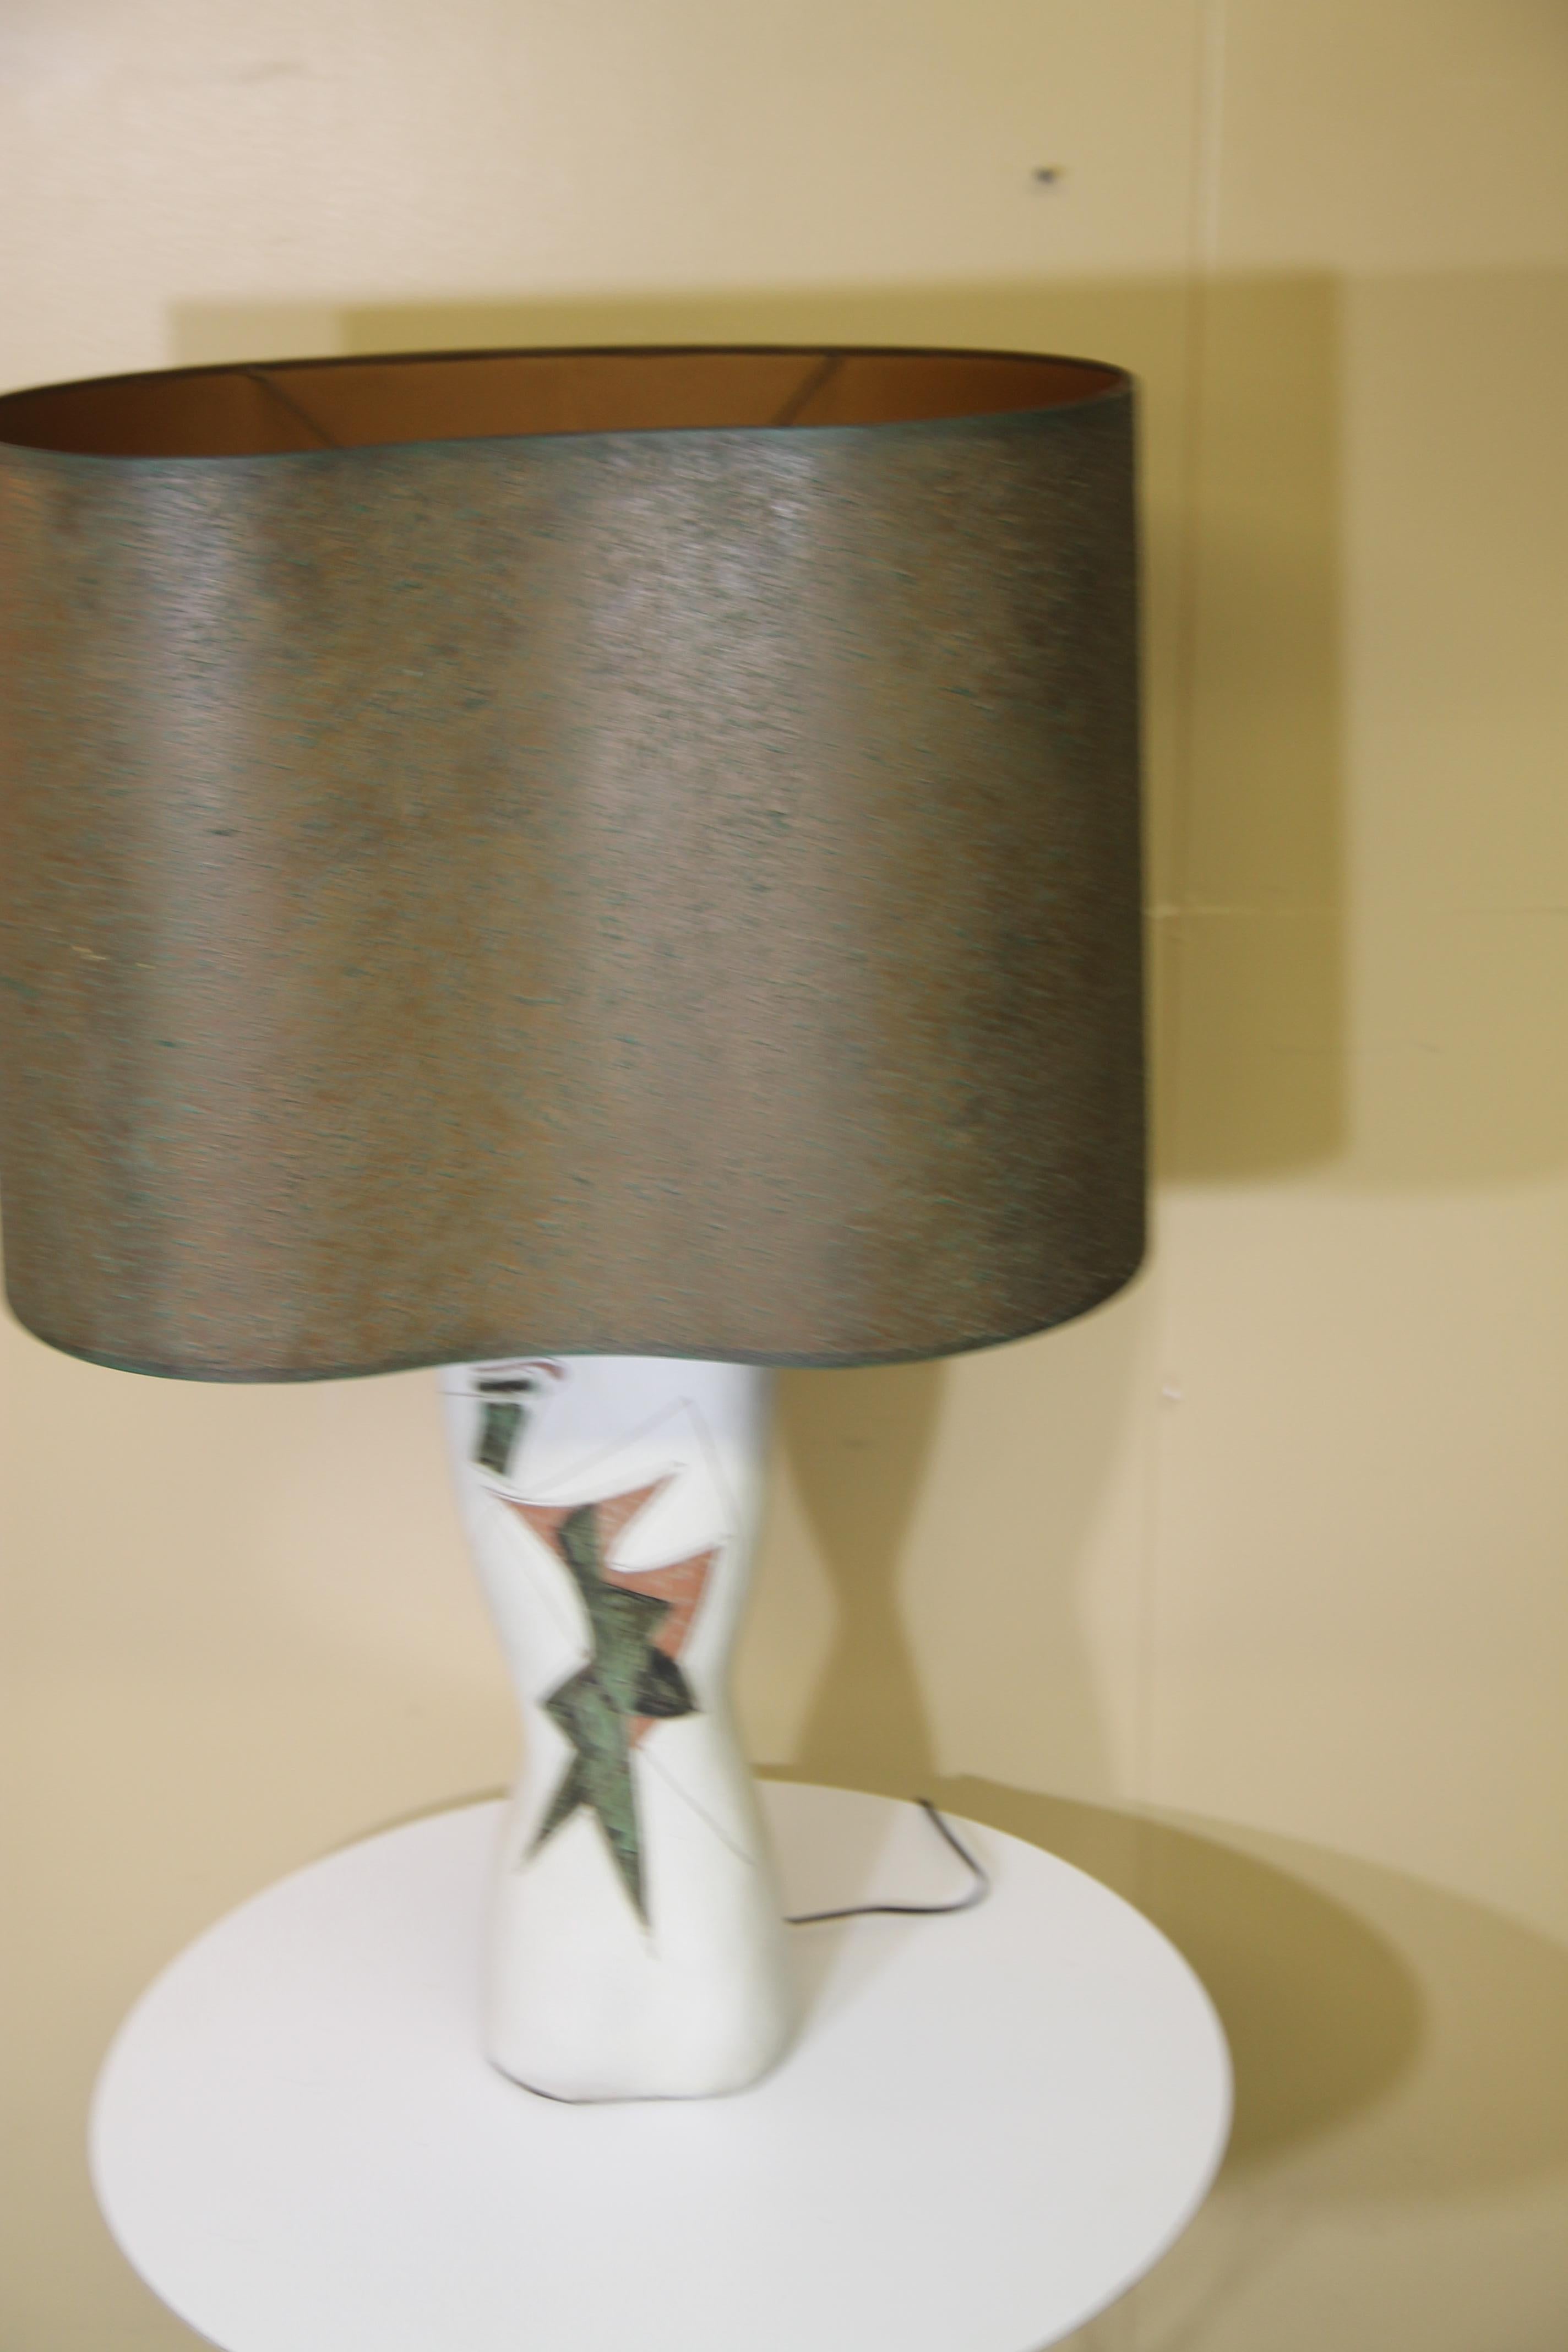 Wonderful abstract designed lamp from Marianna von Allesch. This lamp retains is original green/brown shade. This piece is stunning in person.
Shade is 21.75 x 16 x 16
Overall height of the lamp with the shade is 34.75
This lamp should be shipped